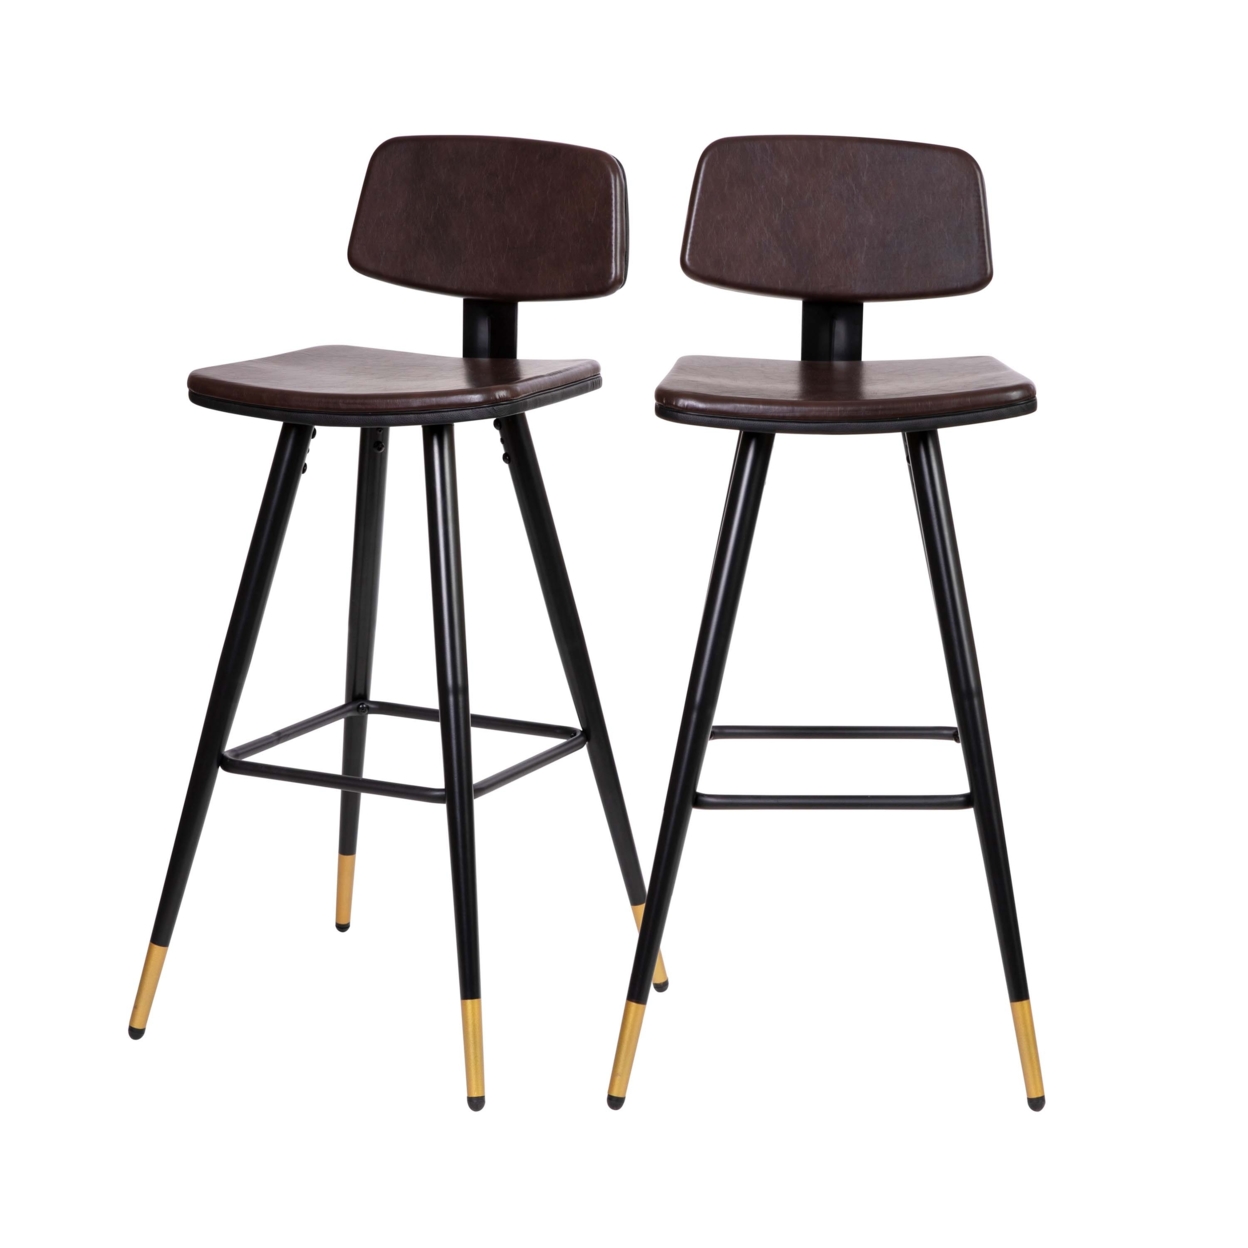 Kora Commercial Grade Low Back Barstools-Brown LeatherSoft Upholstery-Black Iron Frame-Integrated Footrest-Gold Tipped Legs-Set Of 2